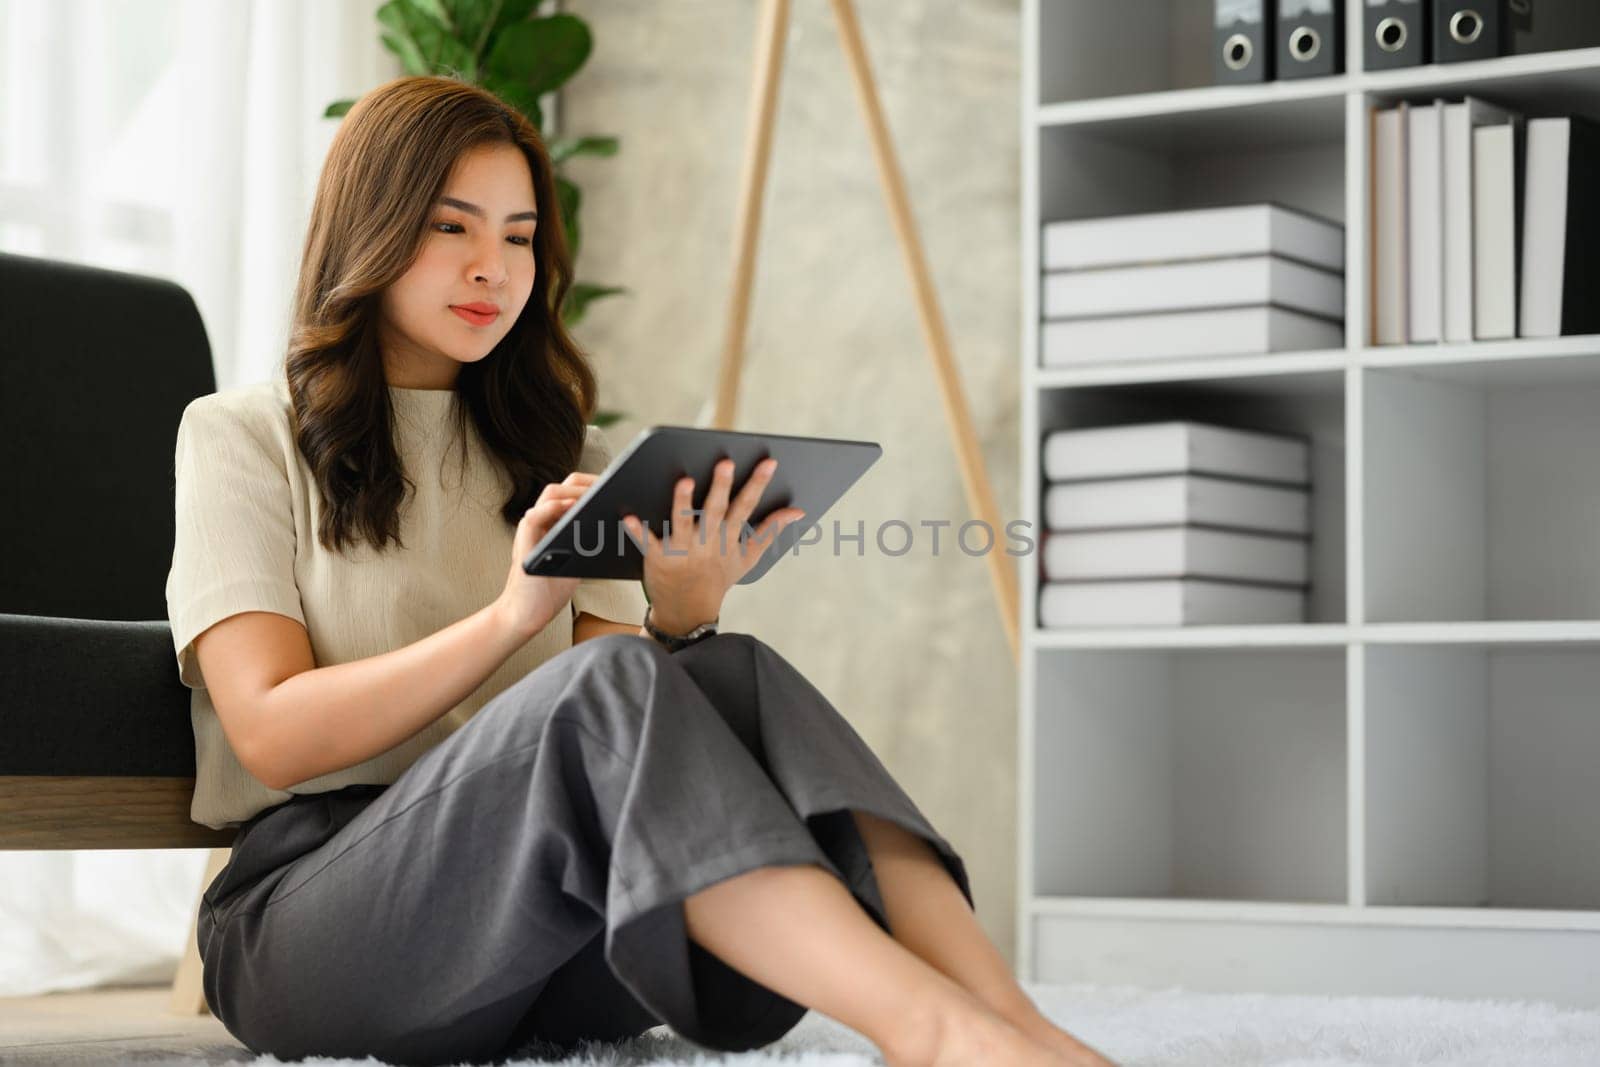 Casual millennial asian woman sitting on floor in living room and using digital tablet. Technology, people and lifestyle concept.